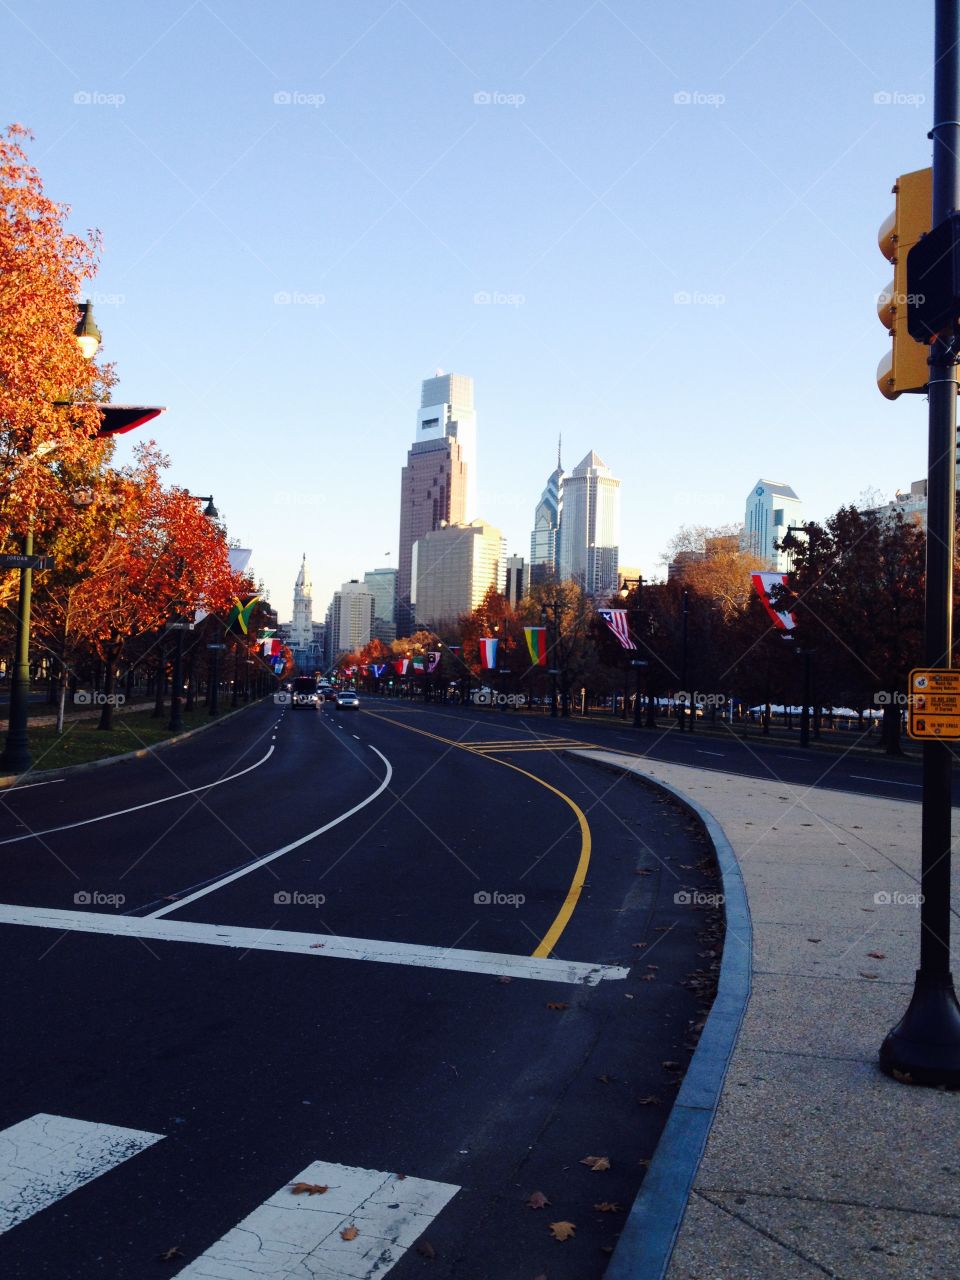 The Parkway. A view of Philadelphia from the Ben Franklin Parkway